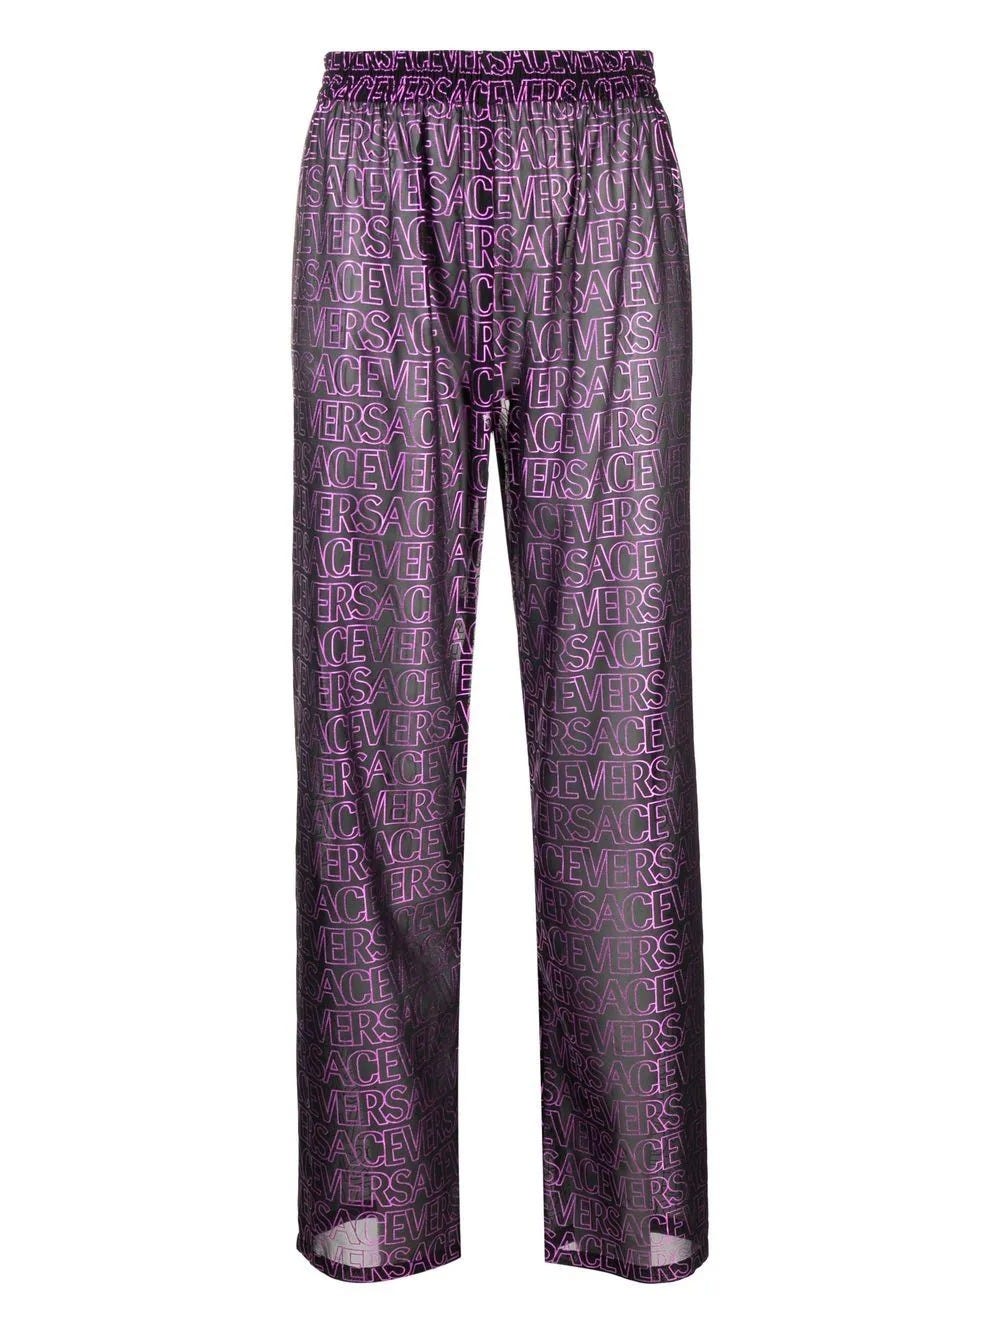 VERSACE BLACK SEMI-TRANSPARENT TROUSERS WITH PINK LOGO PRINT